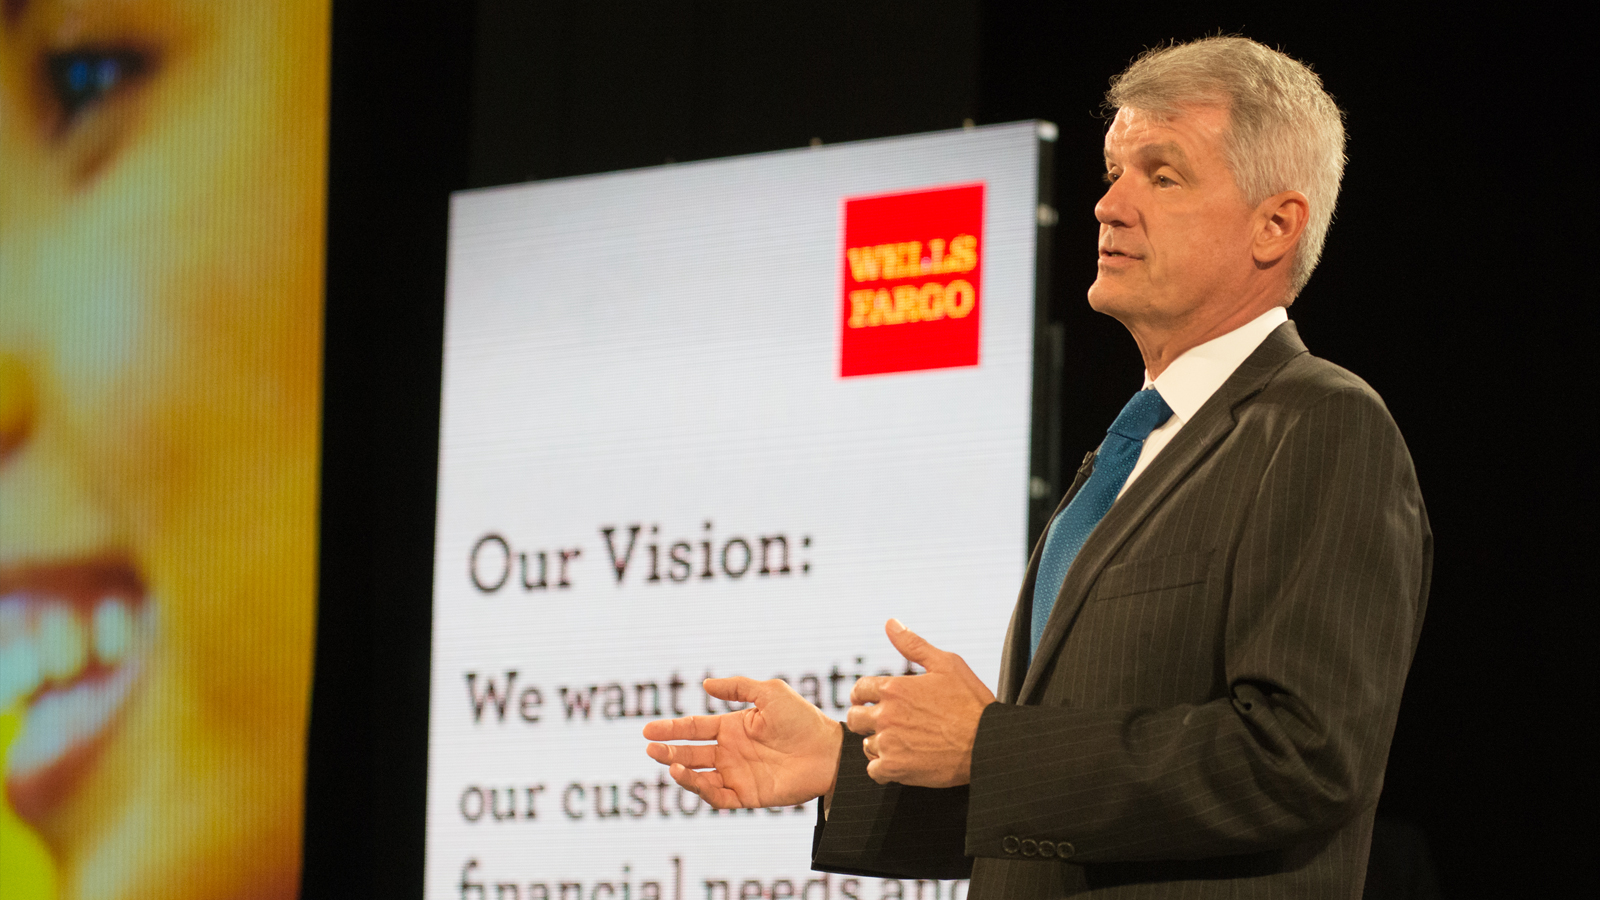 Wells Fargo CEO and President Tim Sloan speaks to team members during a company wide town hall meeting in Pasadena, CA on May 16, 2017. (Via Wells Fargo)